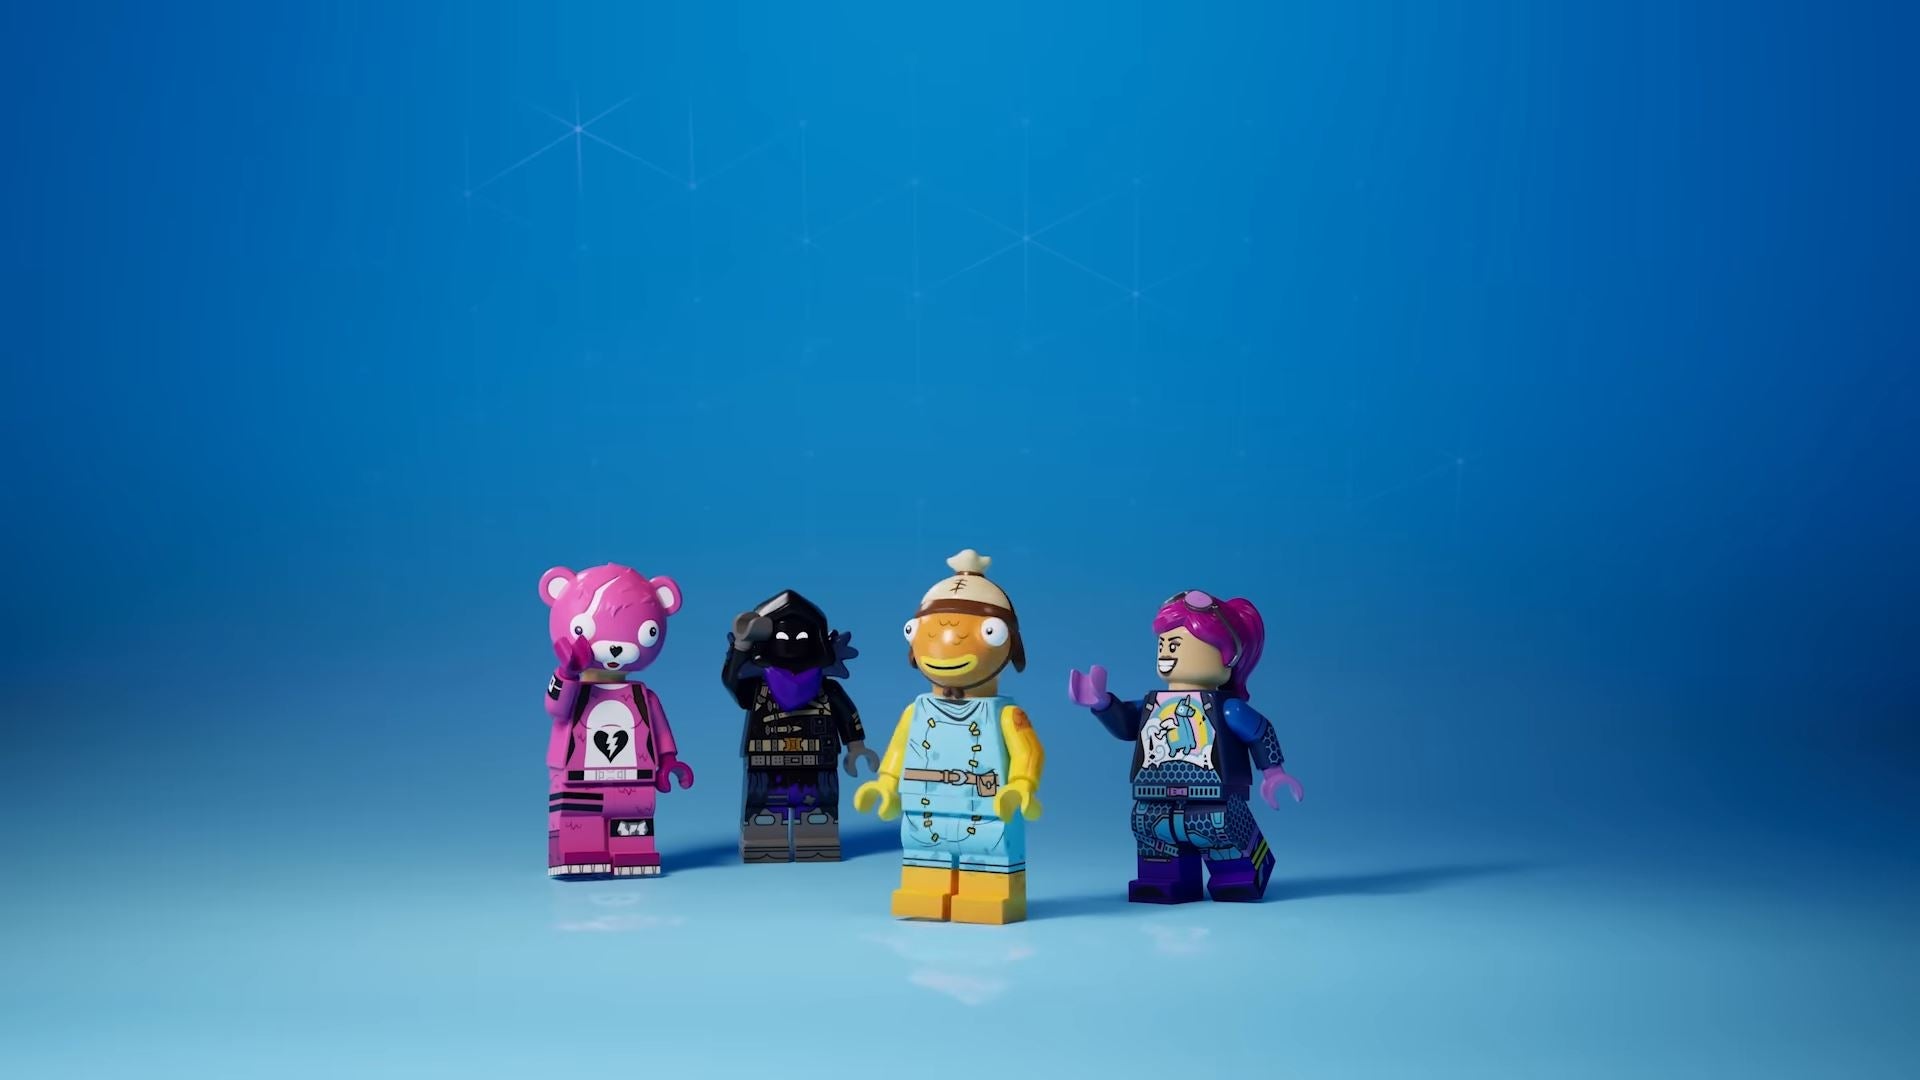 How to Get Fortnite Lego Skins